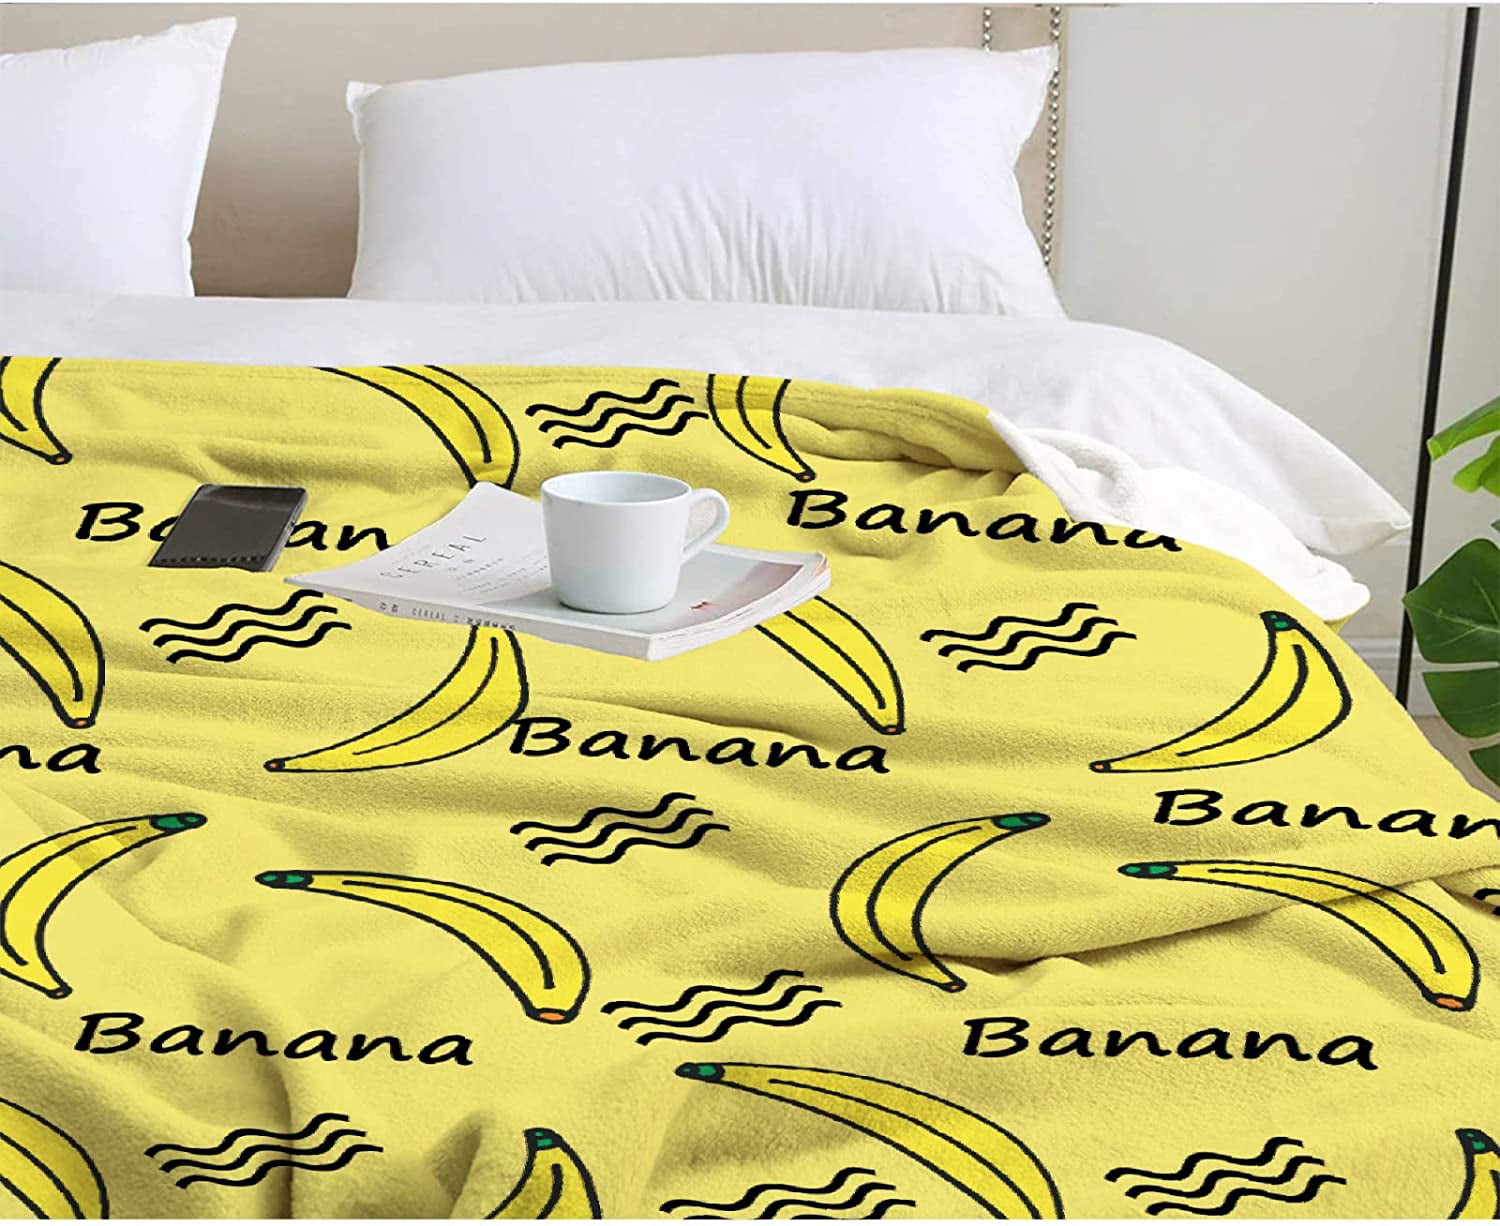 Banana Flannel Blankets Used for Bed,Sofa,Couch, Lightweight ,Cozy,Warm  Comfy,Fluffy,Microfiber Full Size Gift for Women Kids 60inx80in All Season  